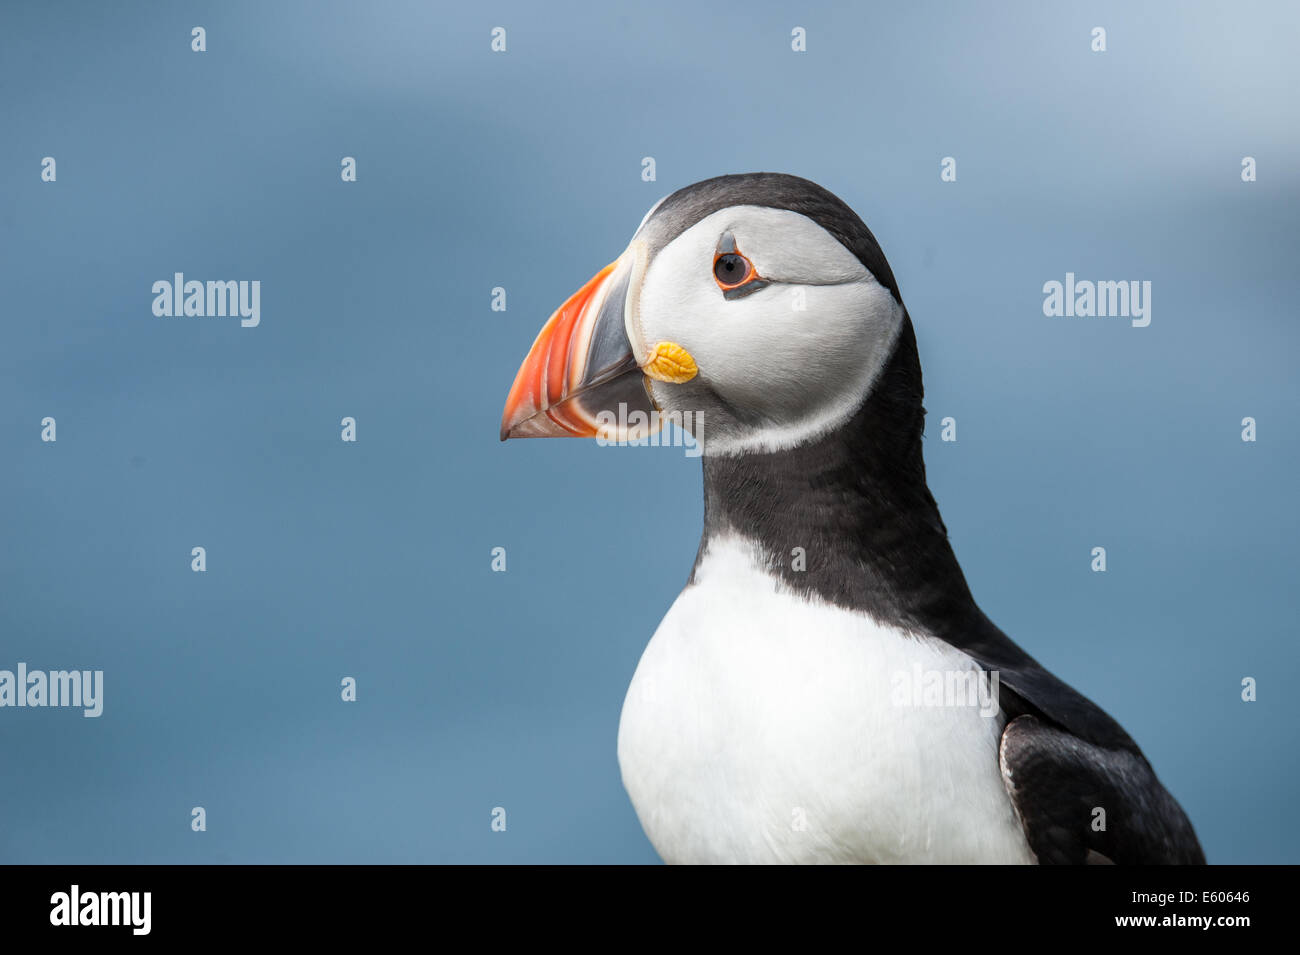 A close-up image of the head of an Atlantic Puffin seen on the island of Lunga off Scotland's west coast. Stock Photo